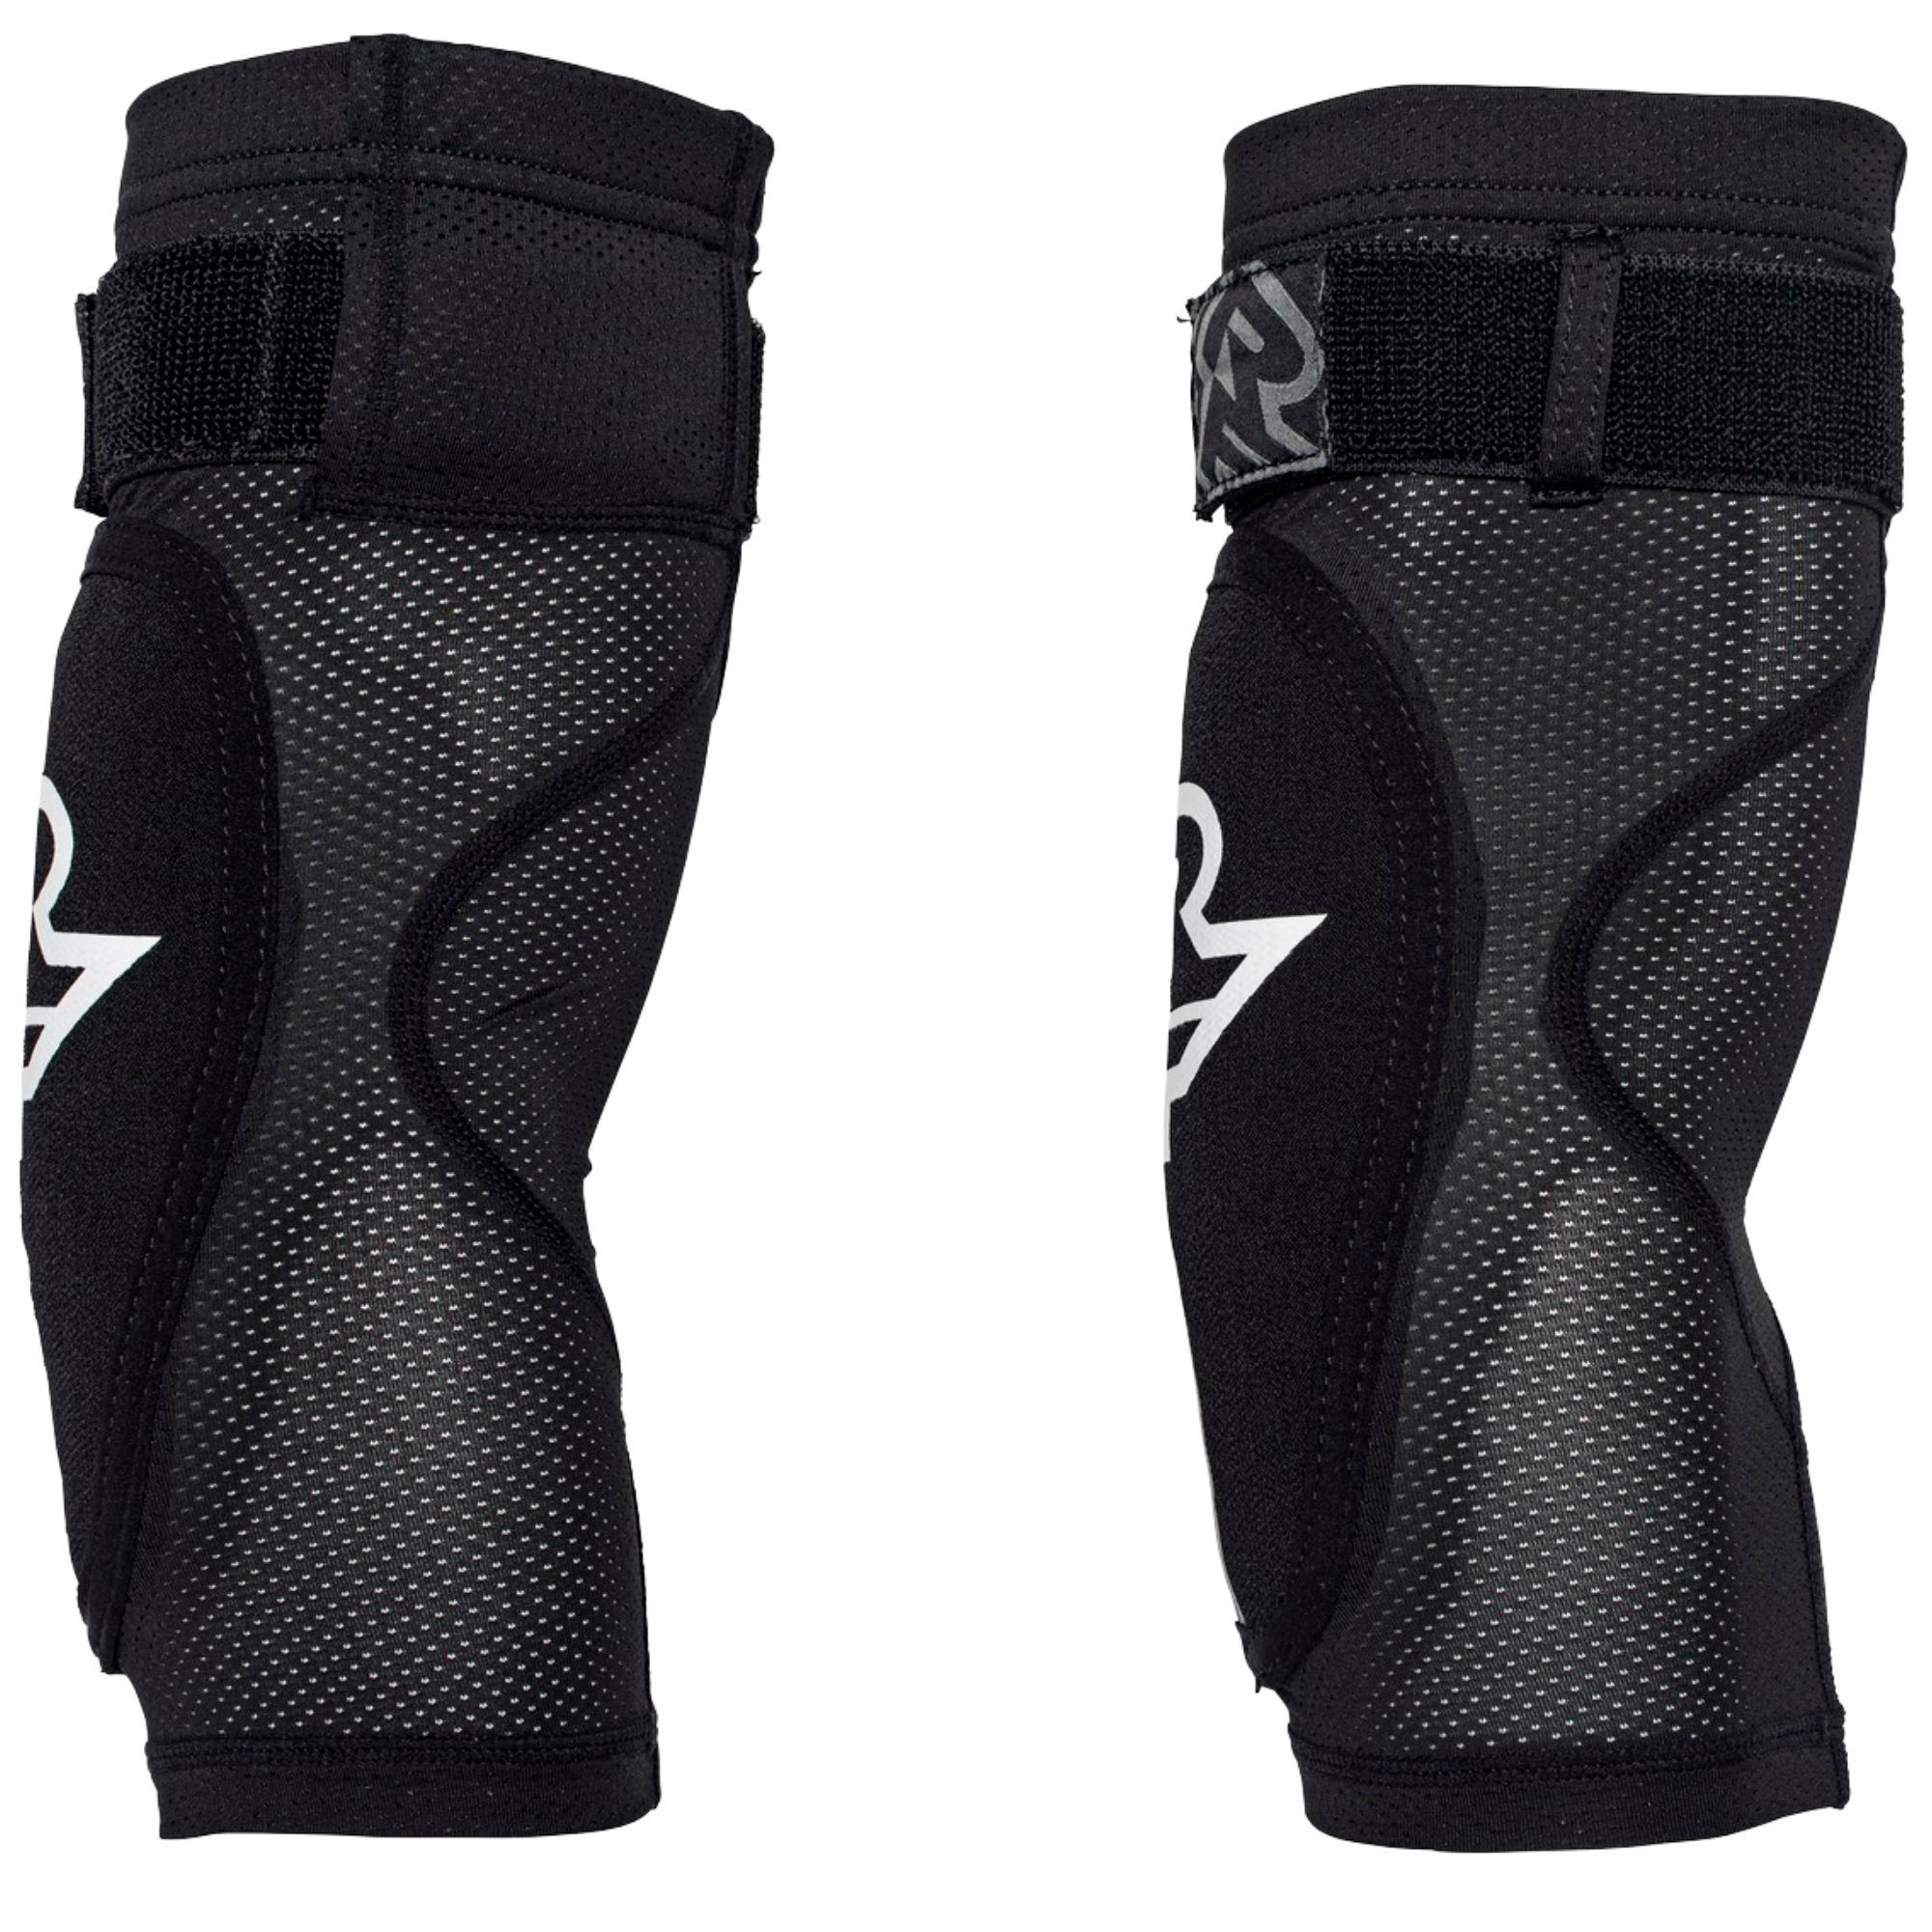 Race Face Indy D30 Elbow Guard - £35.96 | Protection & Padding - Arm ...